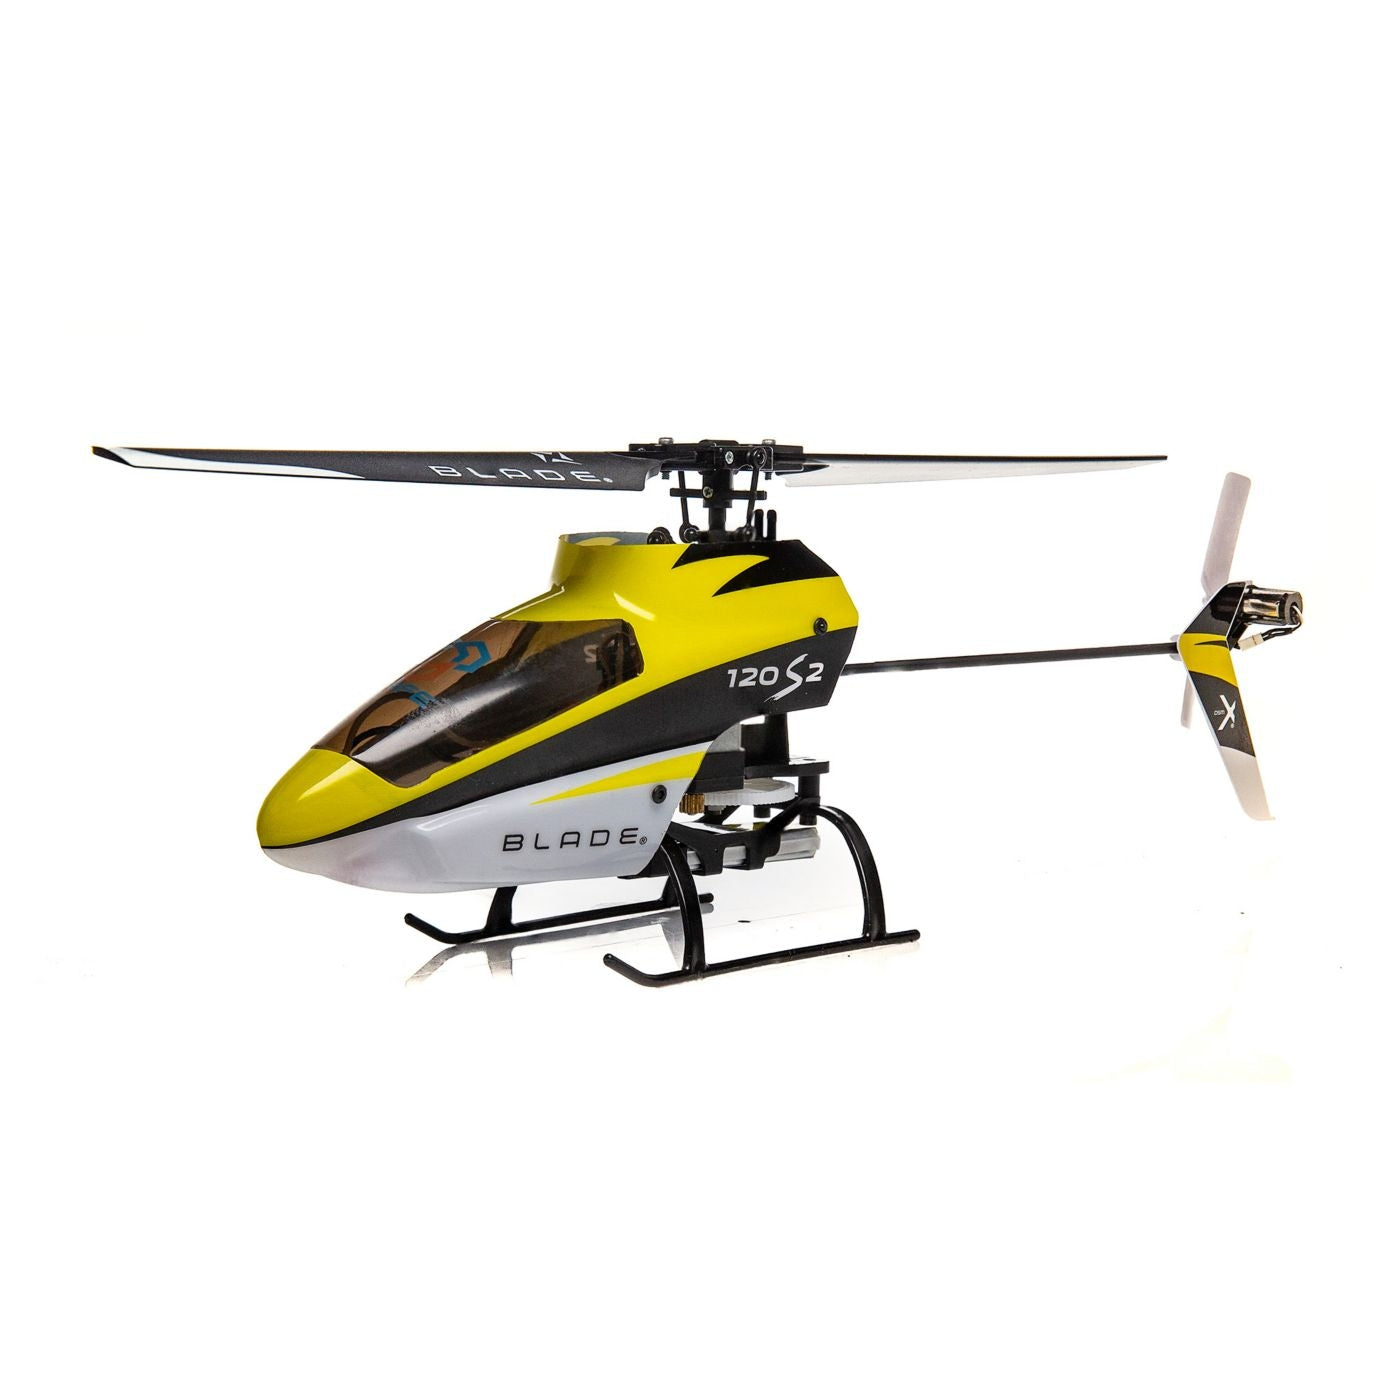 Blade 120 S2 RTF with SAFE Technology BLH1180